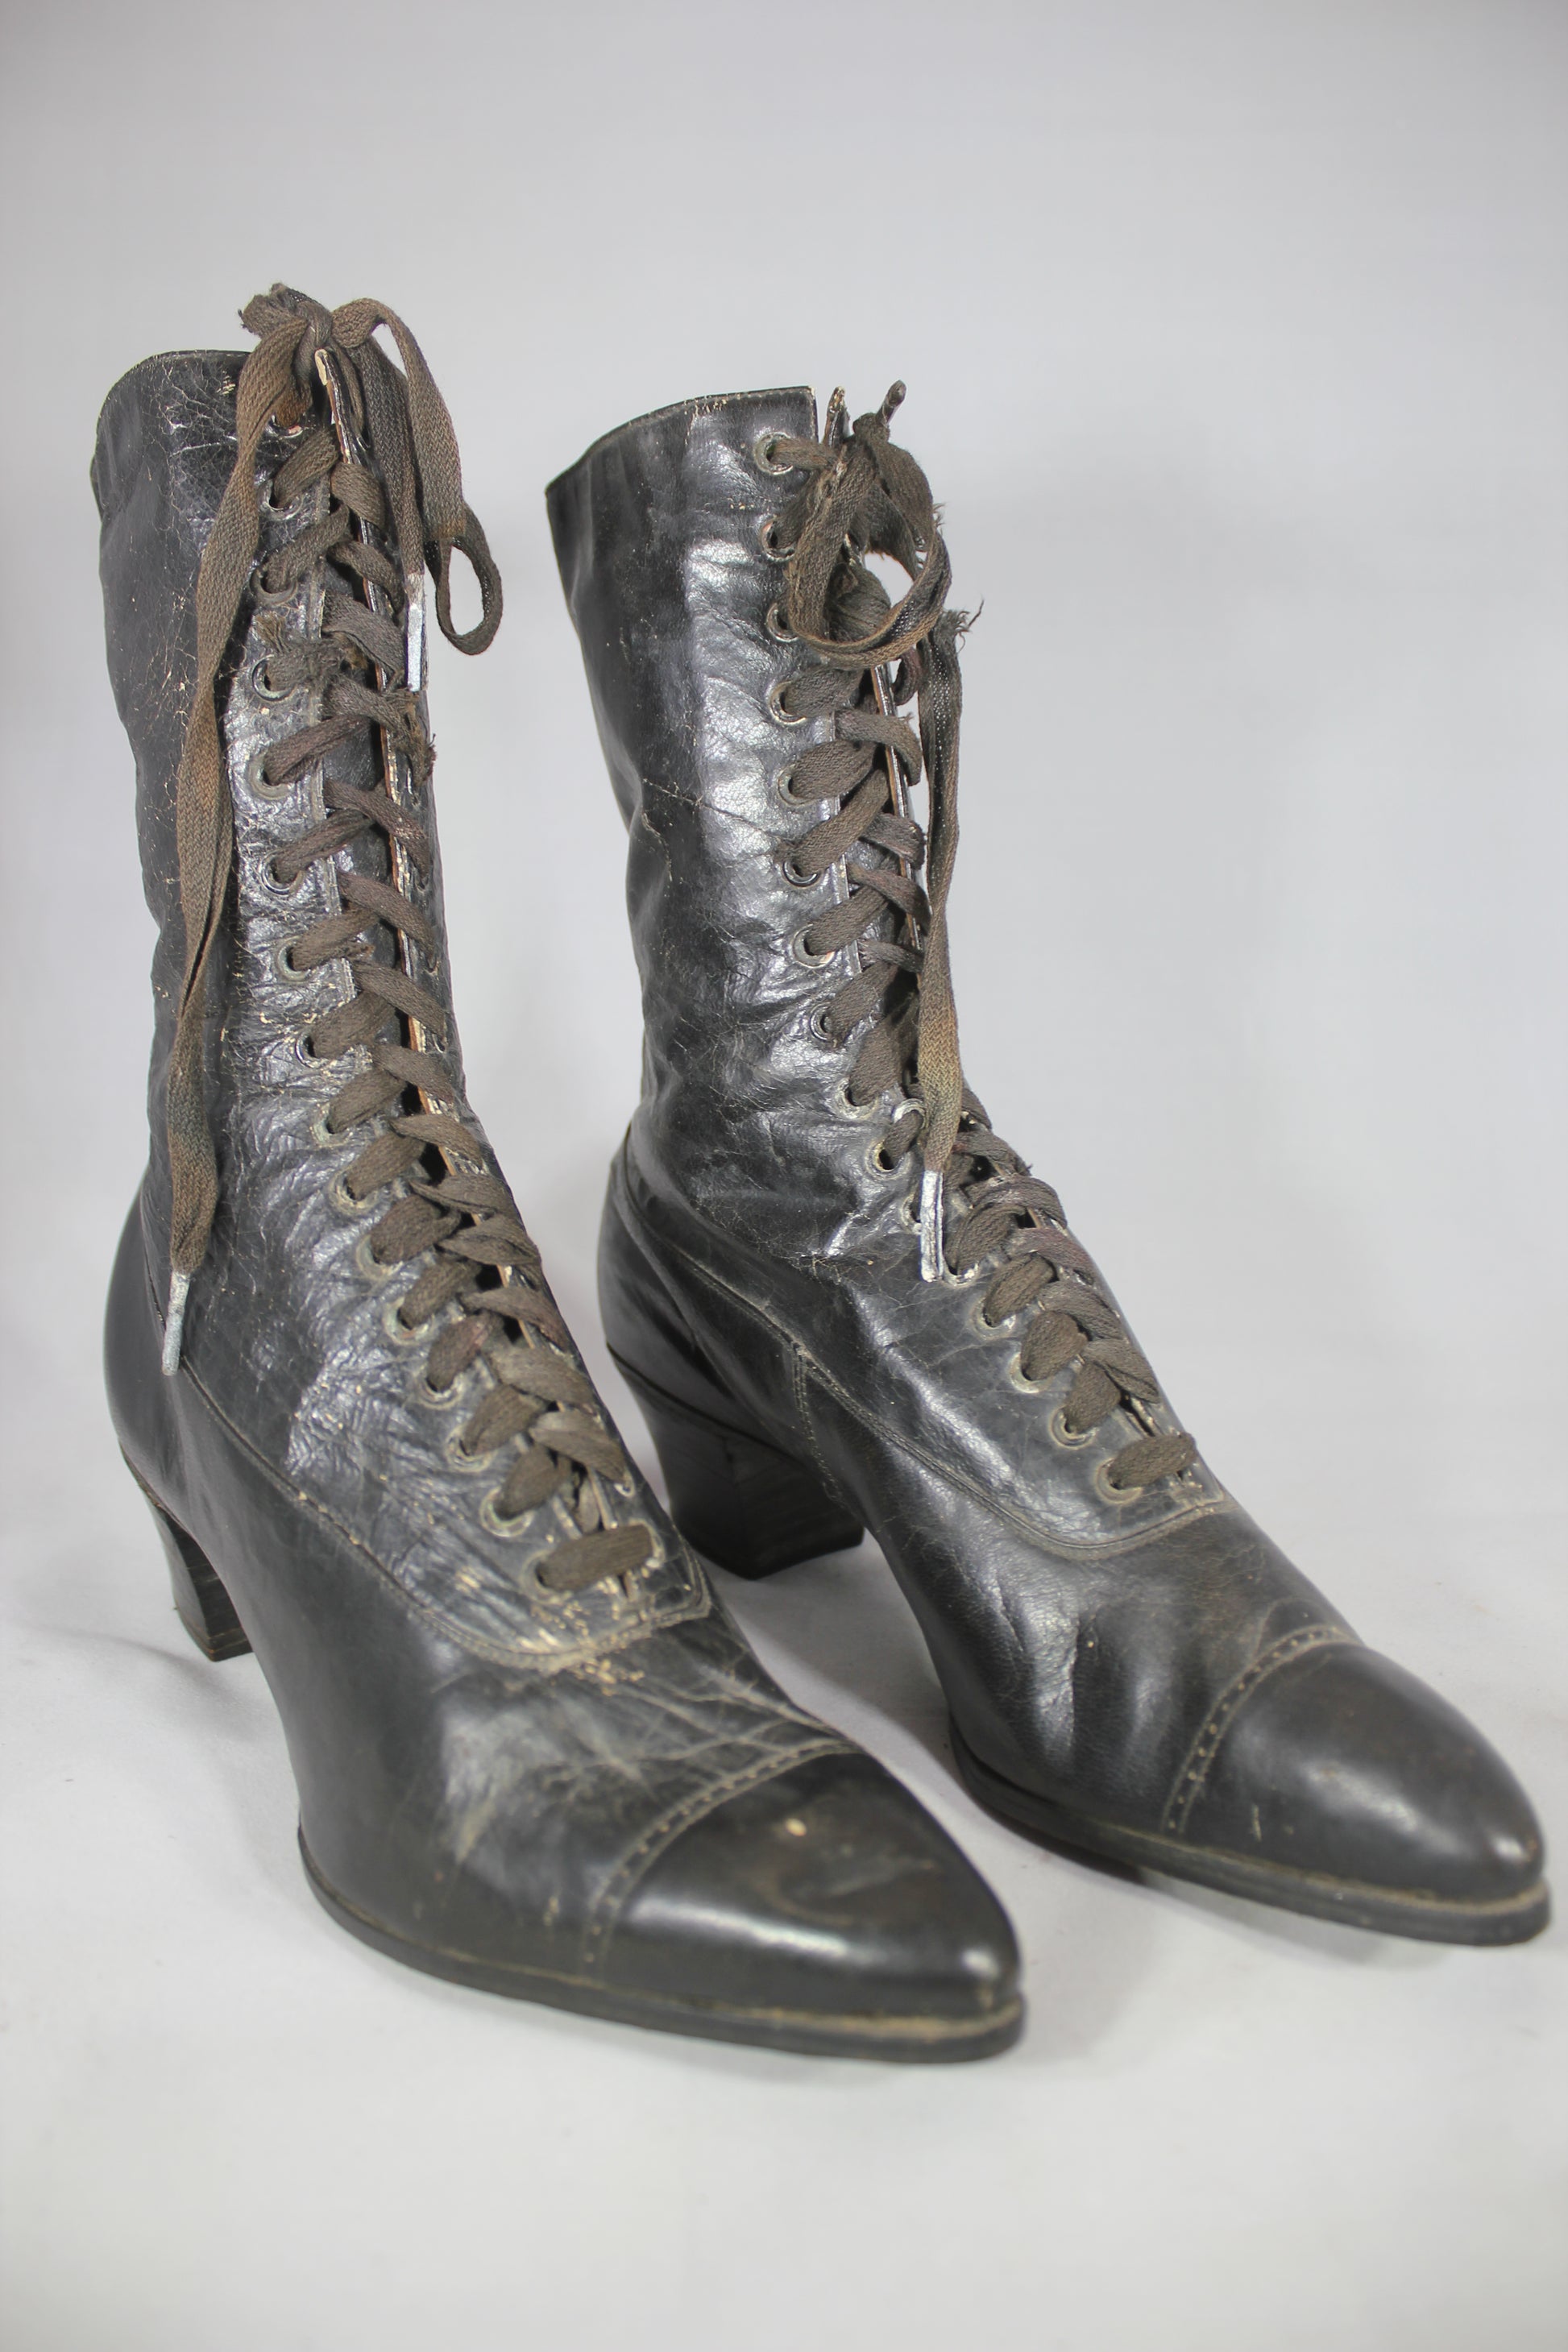 VTG 1890s Victorian womens High Lace Up Leather boots shoes Peters